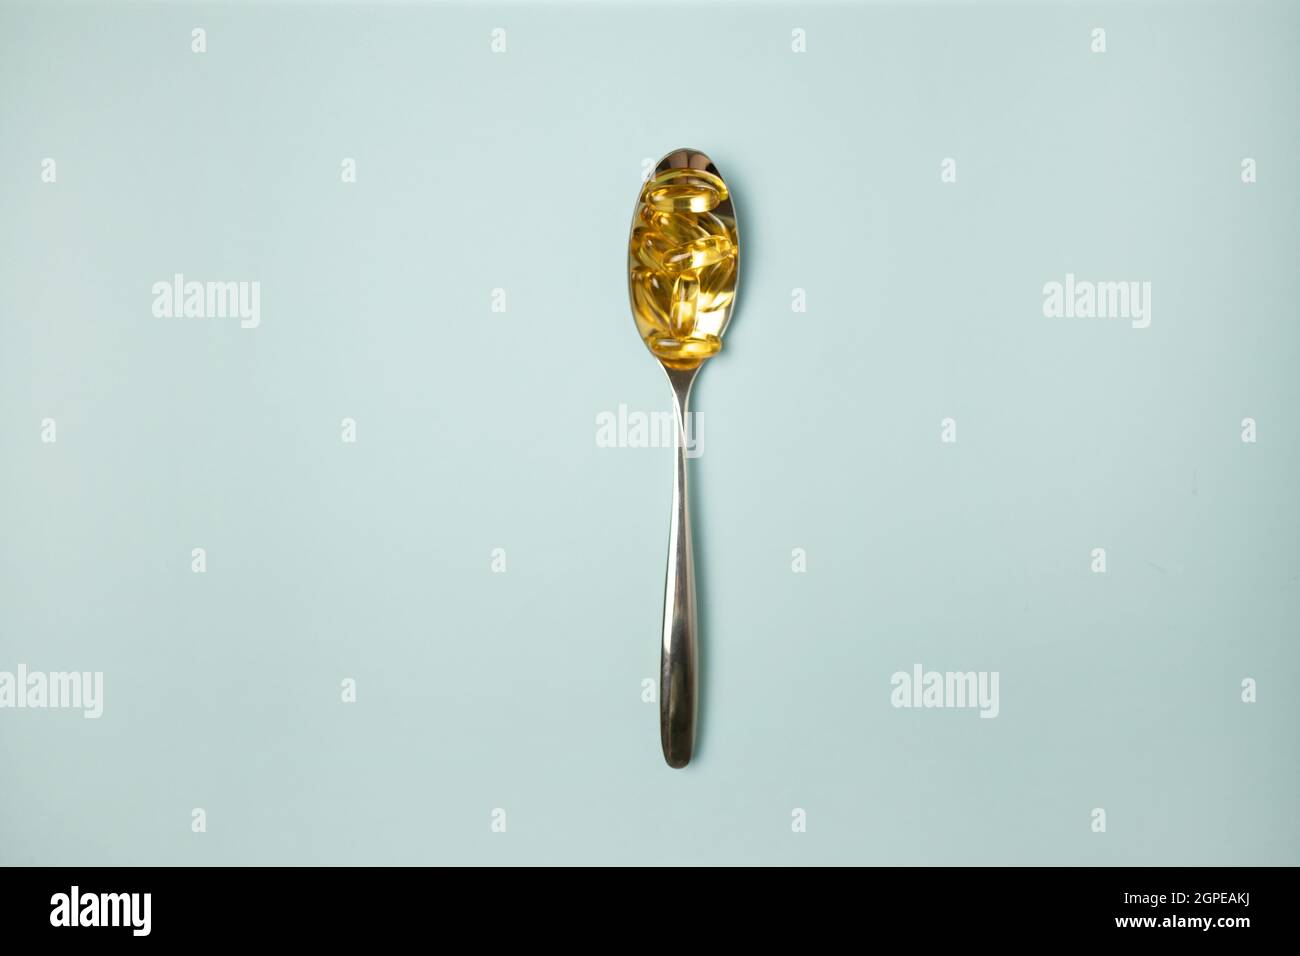 Metal spoon of Omega-3 capsules on blue background with copyspace Stock Photo